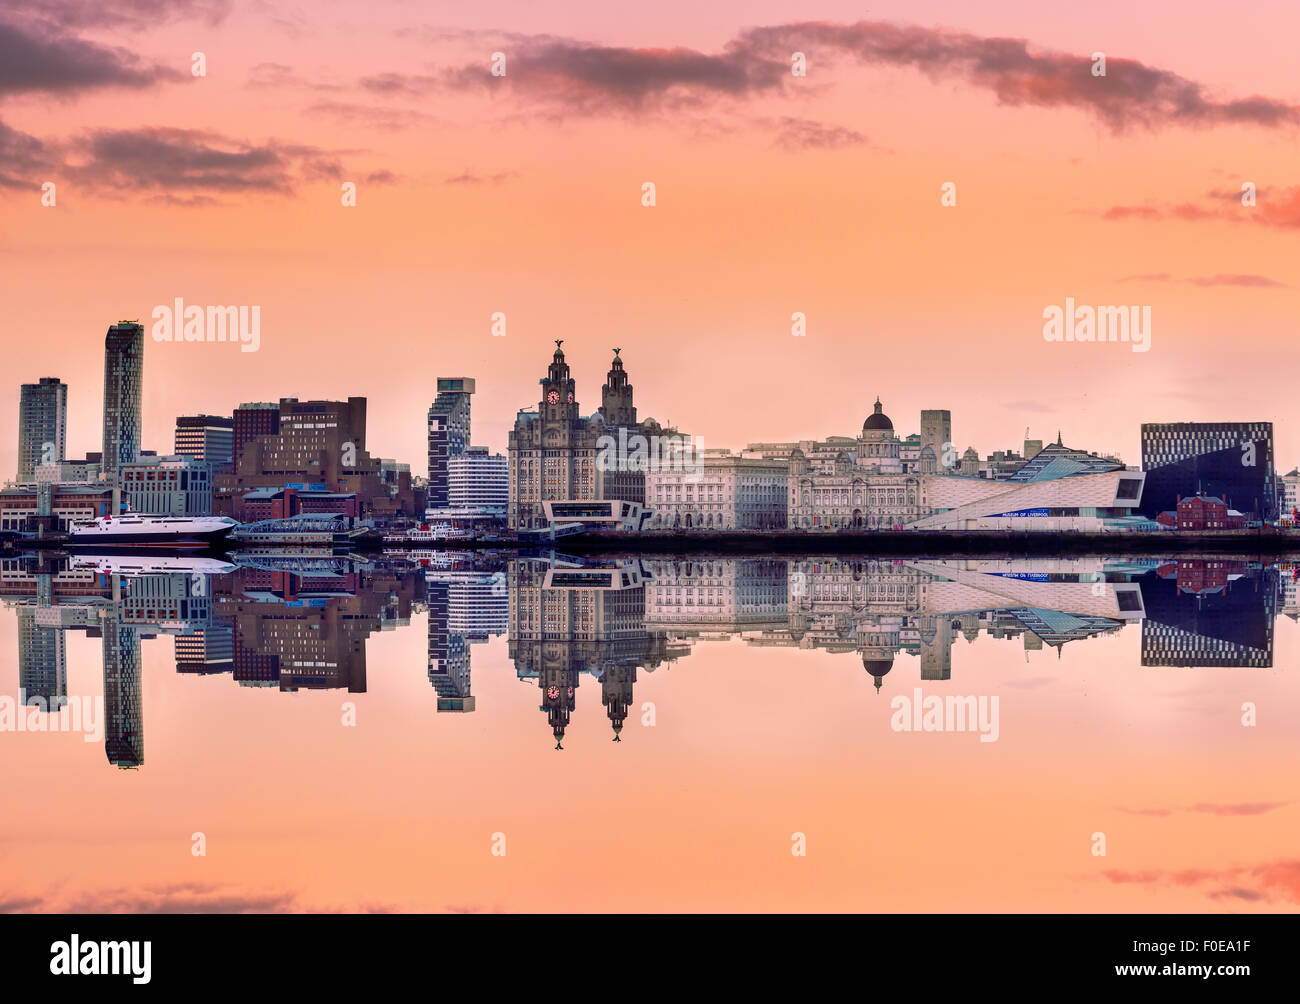 Liverpool skyline with a panoramic view of all the famous landmarks on the bank of Mersey river. Stock Photo